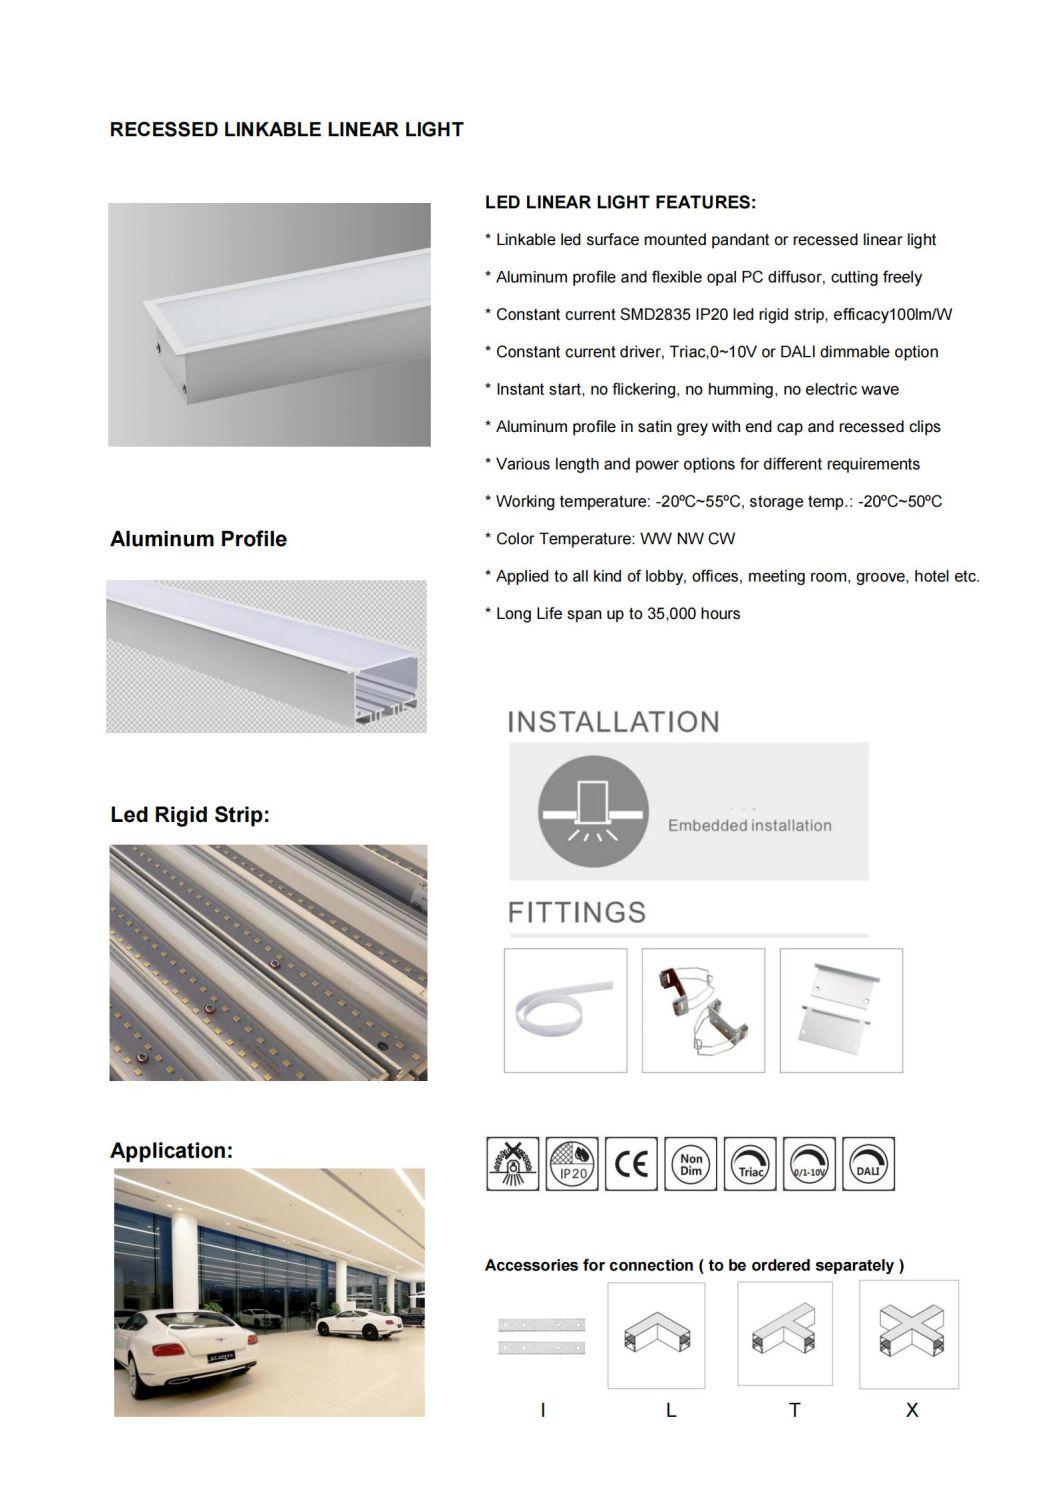 30W Recessed Linkable Facade DOT Free LED Linear Light for Office, Gmy, Shopping Mall, Decorative Site Linear Lighting Fixtures